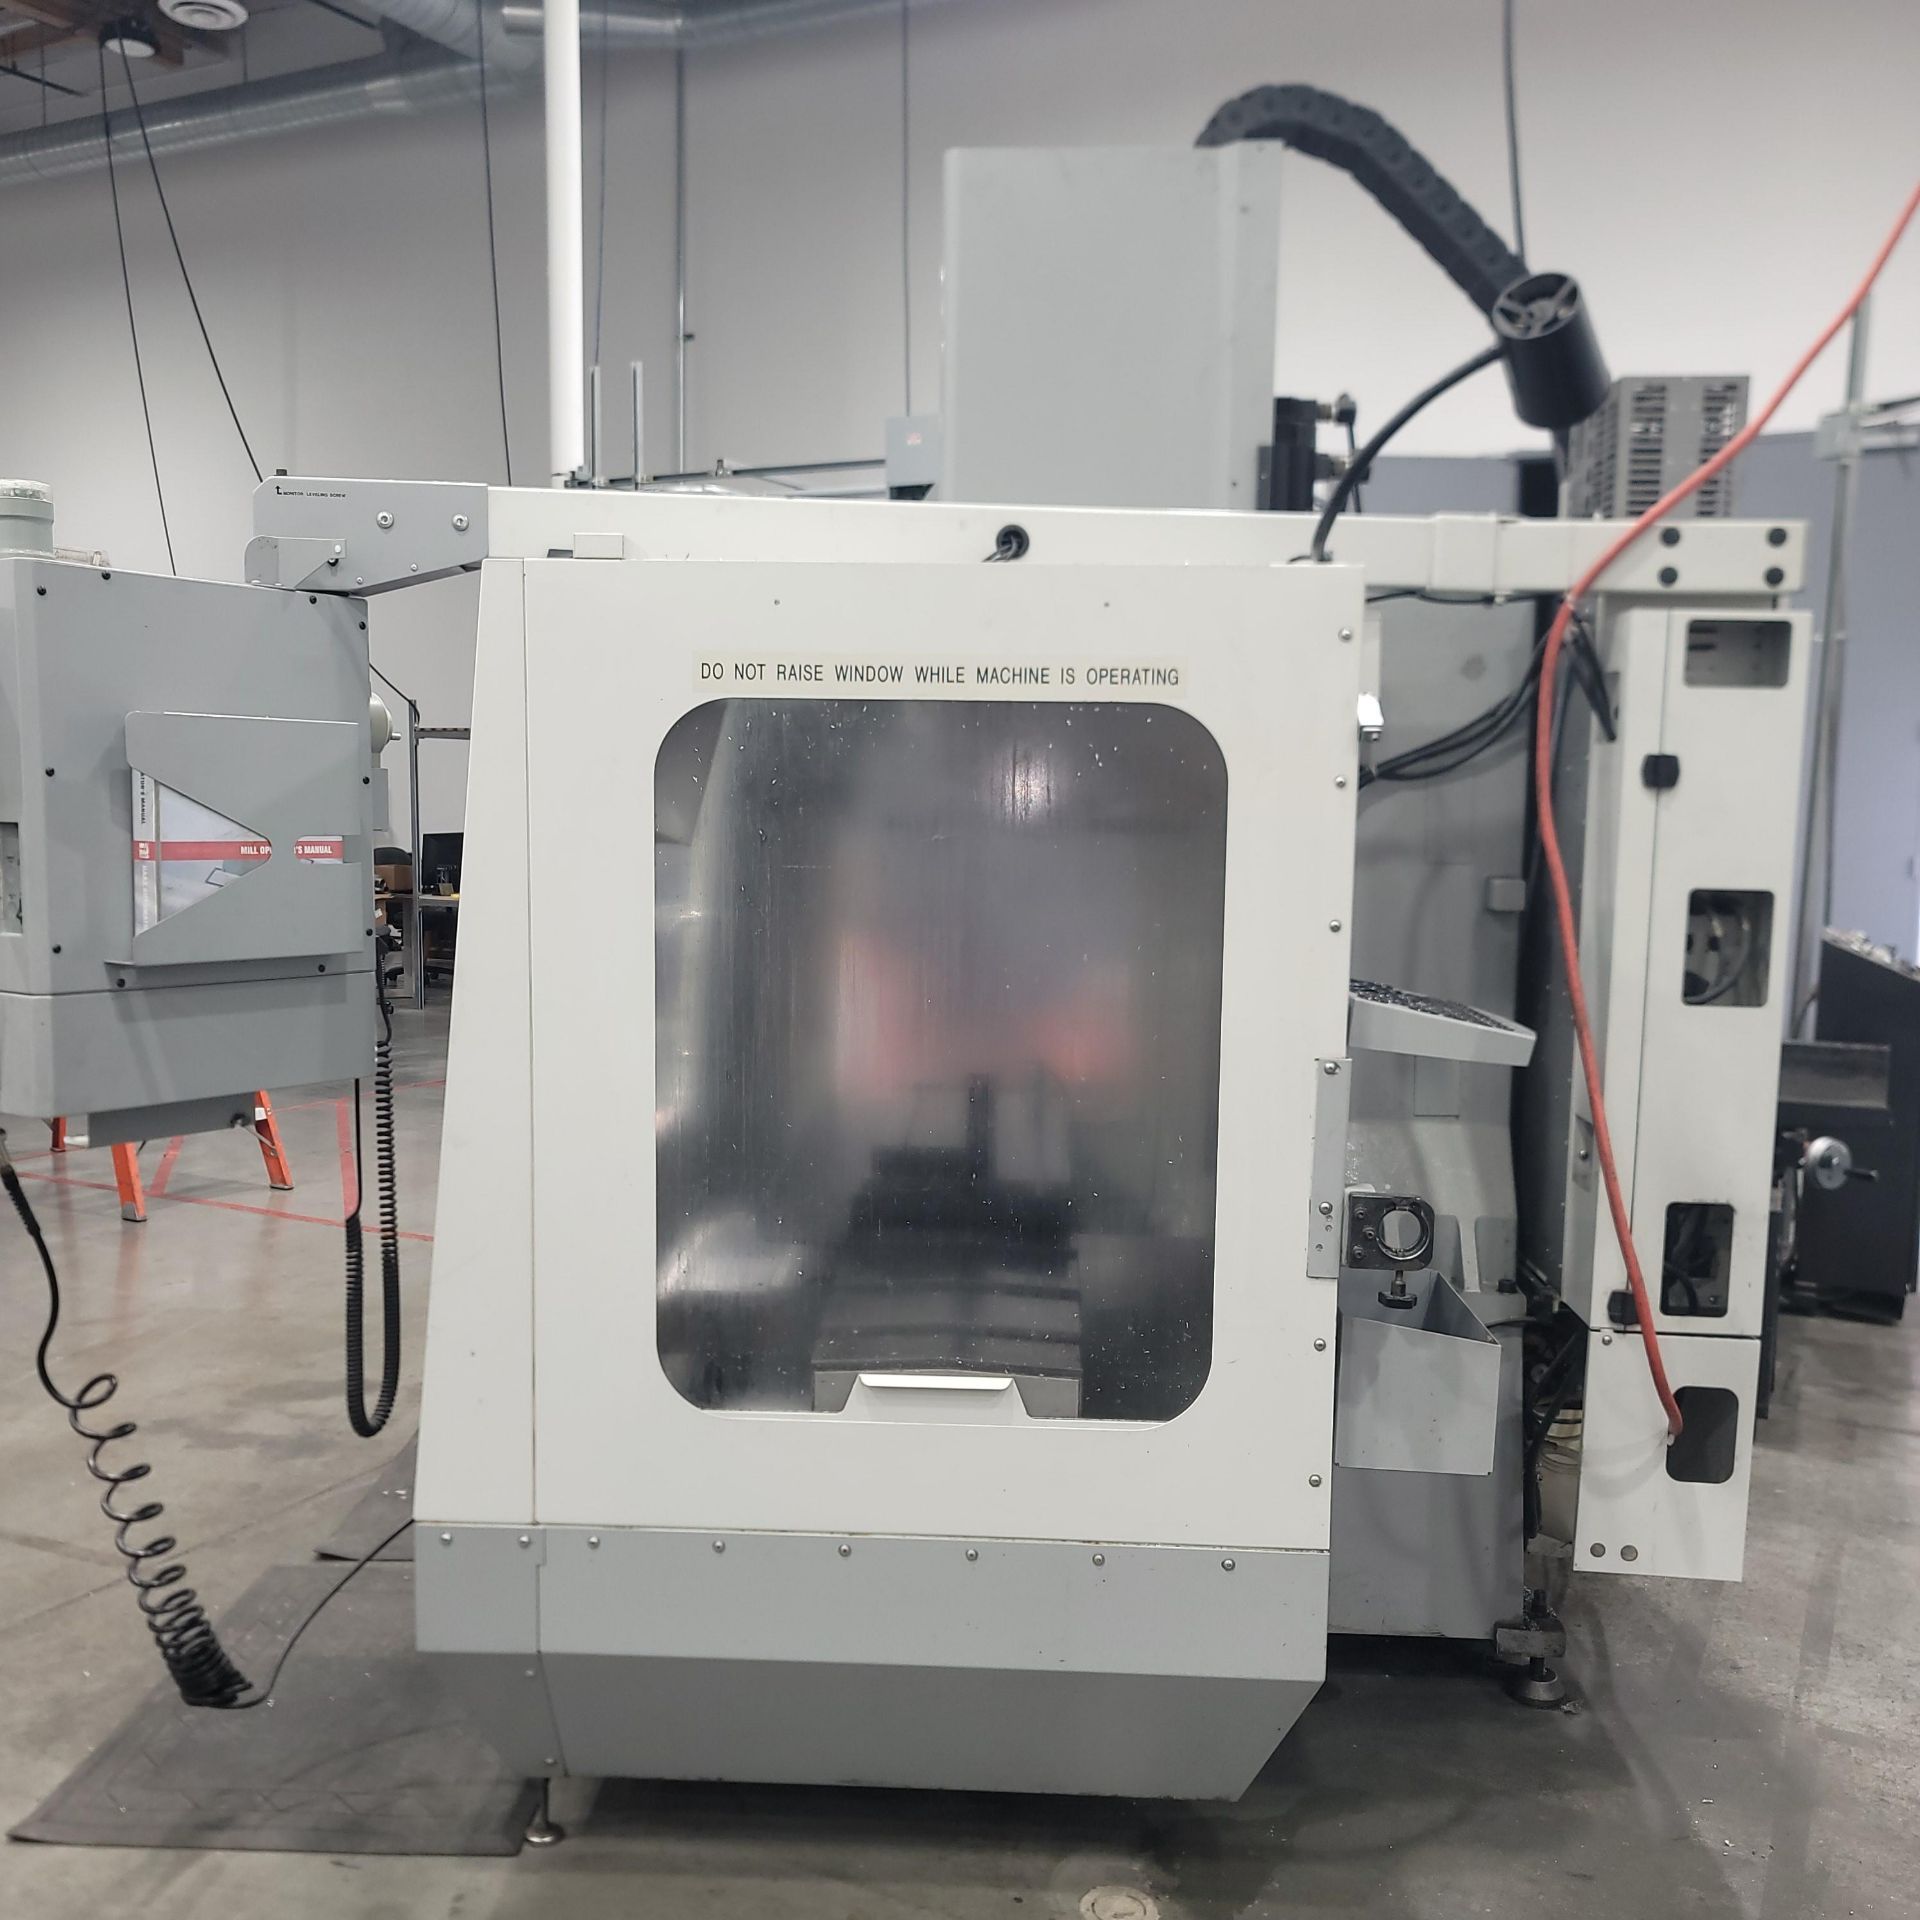 2006 HAAS VF-2D VERTICAL MACHINING CENTER, XYZ TRAVELS: 30" X 16" X 20", TABLE SIZE: 36" X 14", - Image 8 of 13